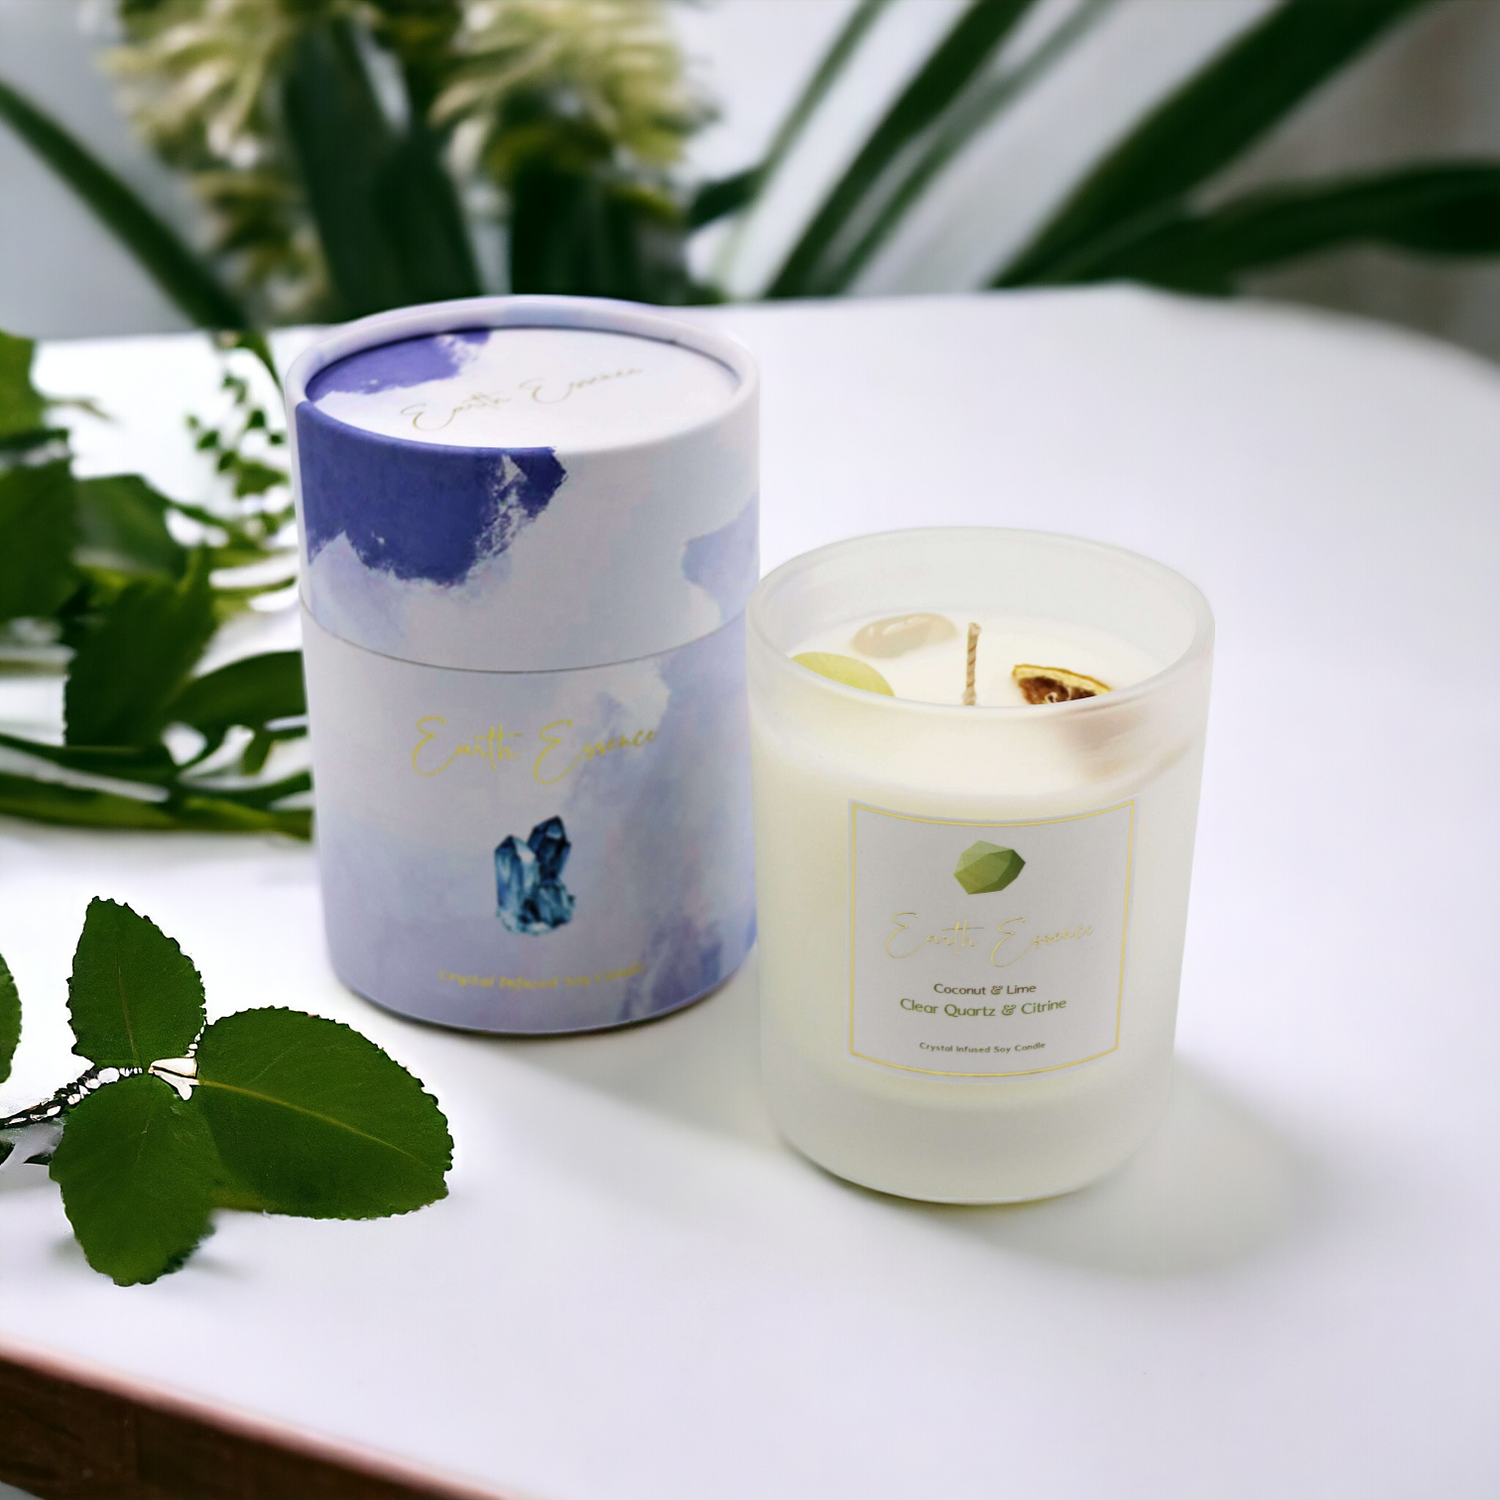 Earth Essence Crystal Soy Wax Candle - Coconut & Lime